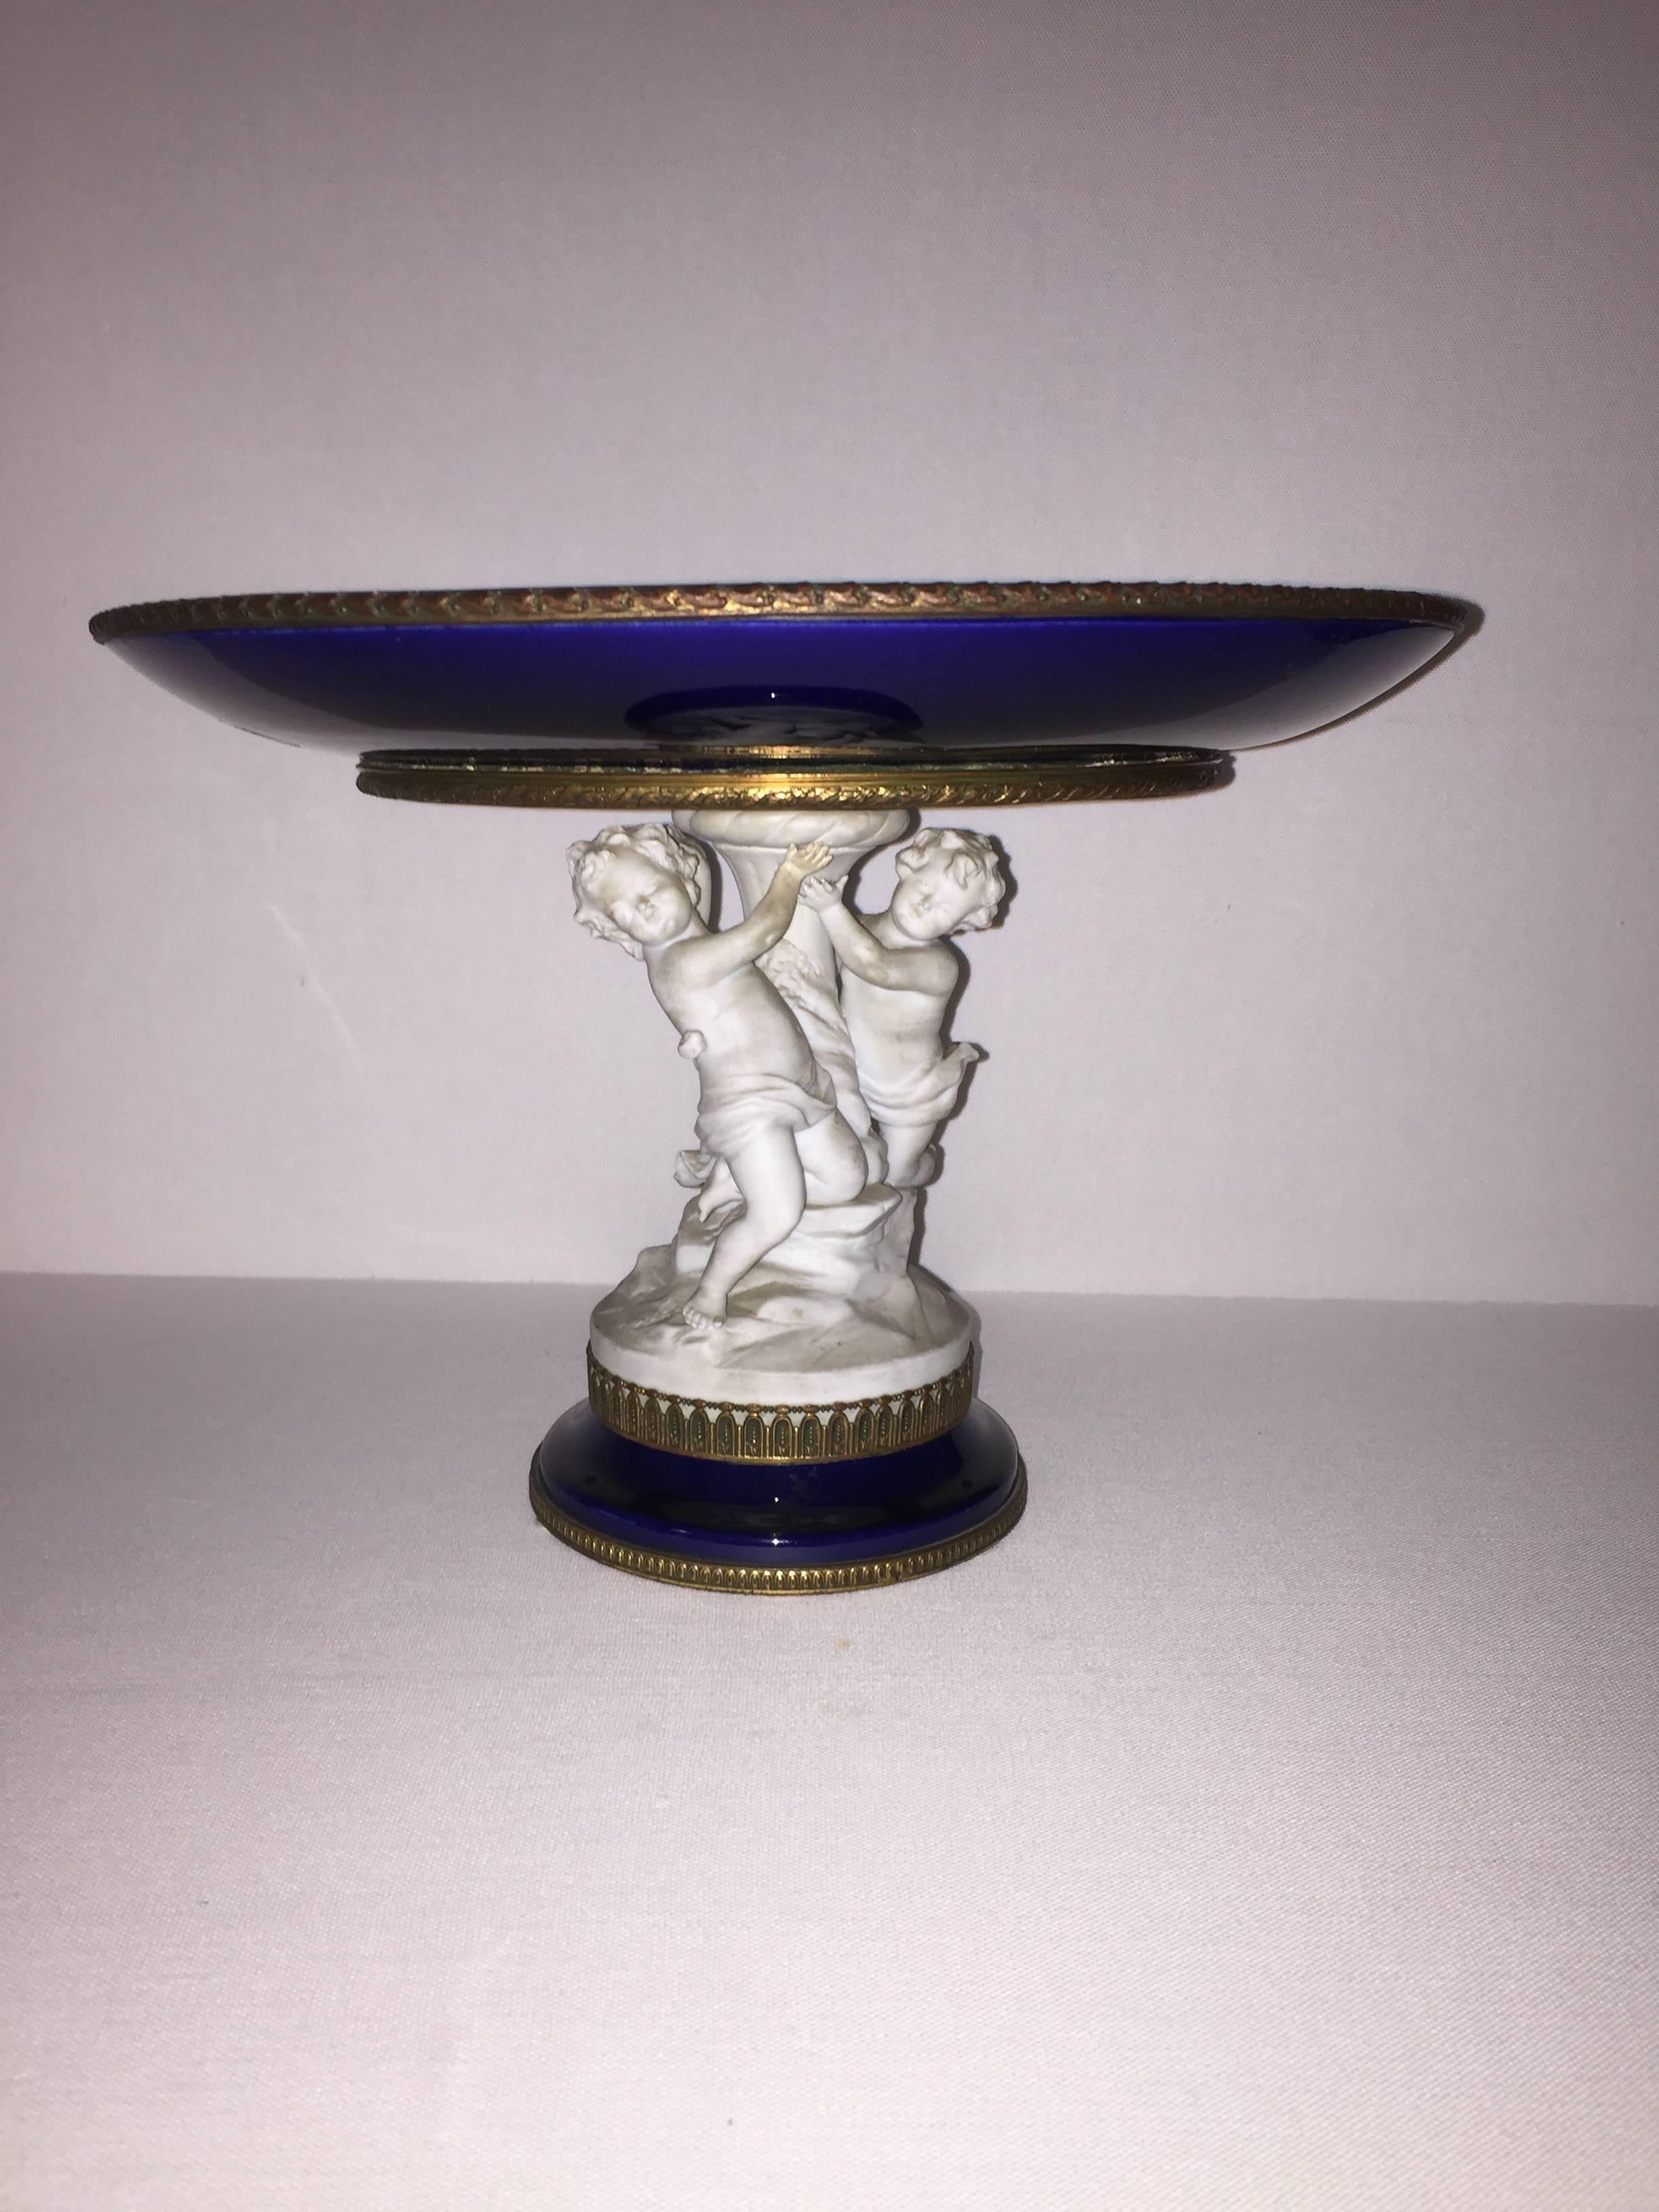 Hand-Crafted Beautiful Early 19th Century Sèvres Porcelain Centerpiece For Sale